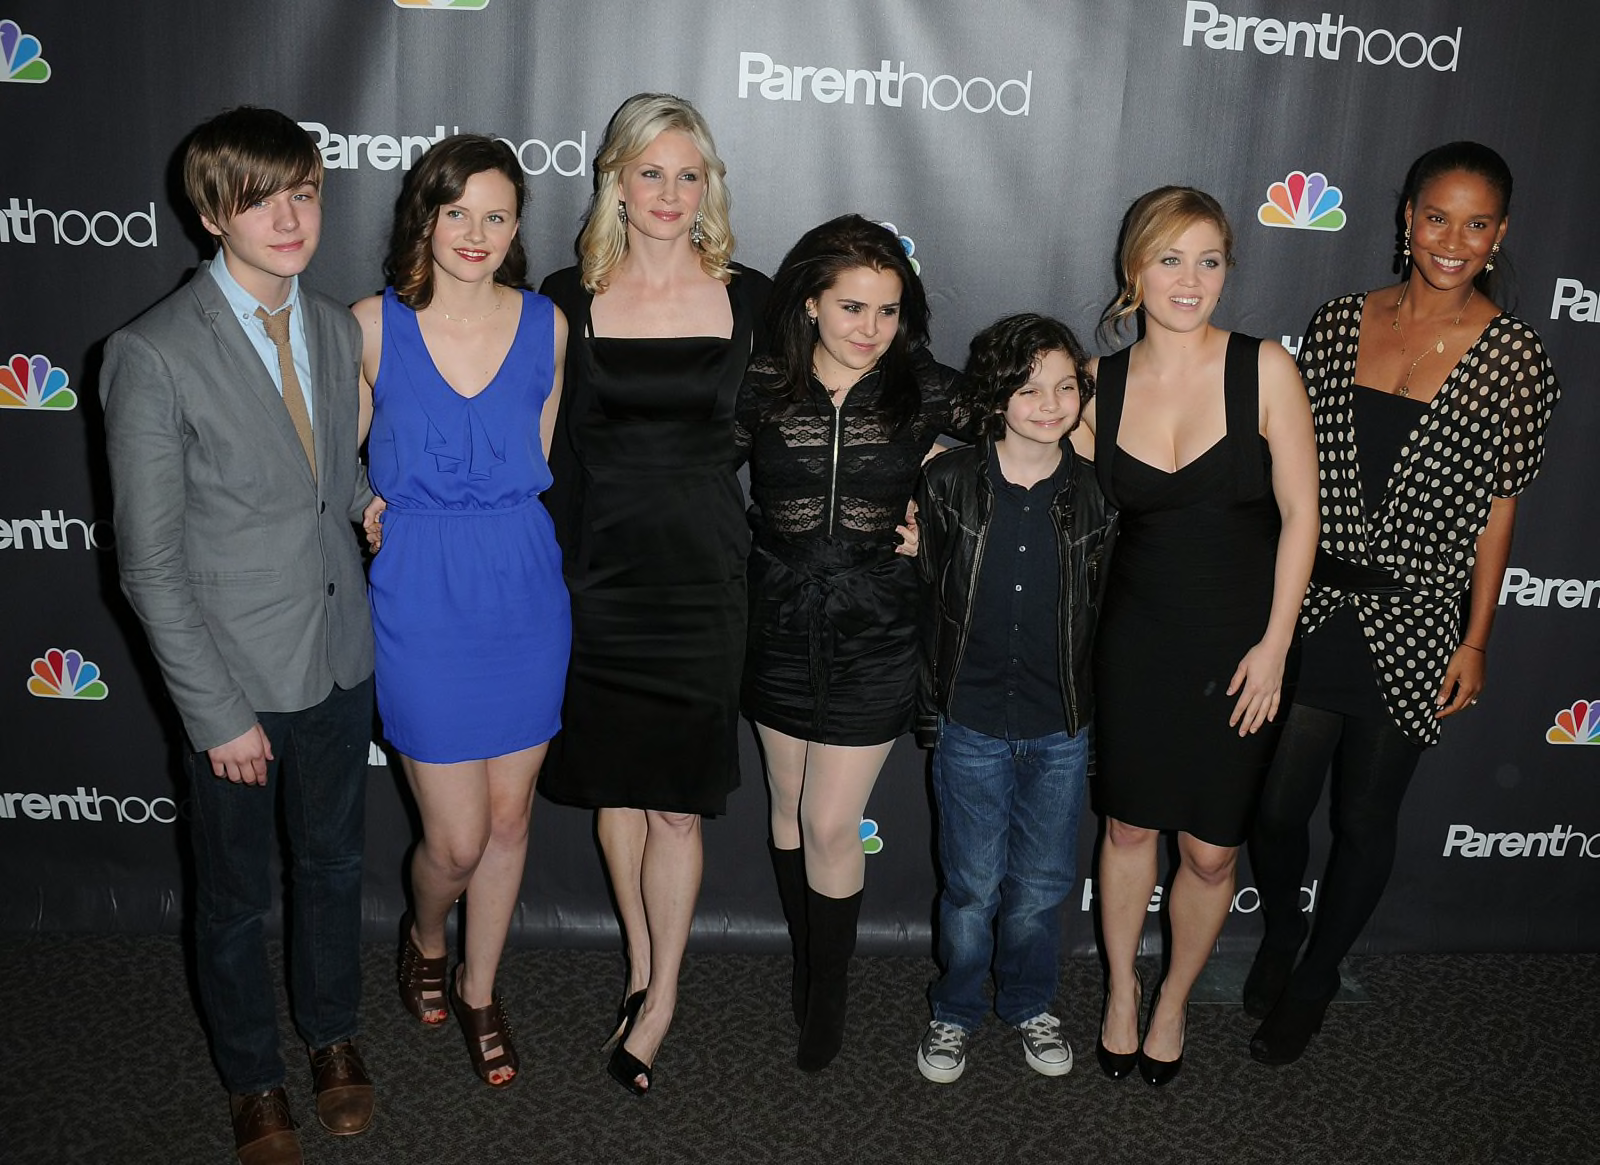 Parenthood: Season 1 | Where to watch streaming and online in New Zealand |  Flicks